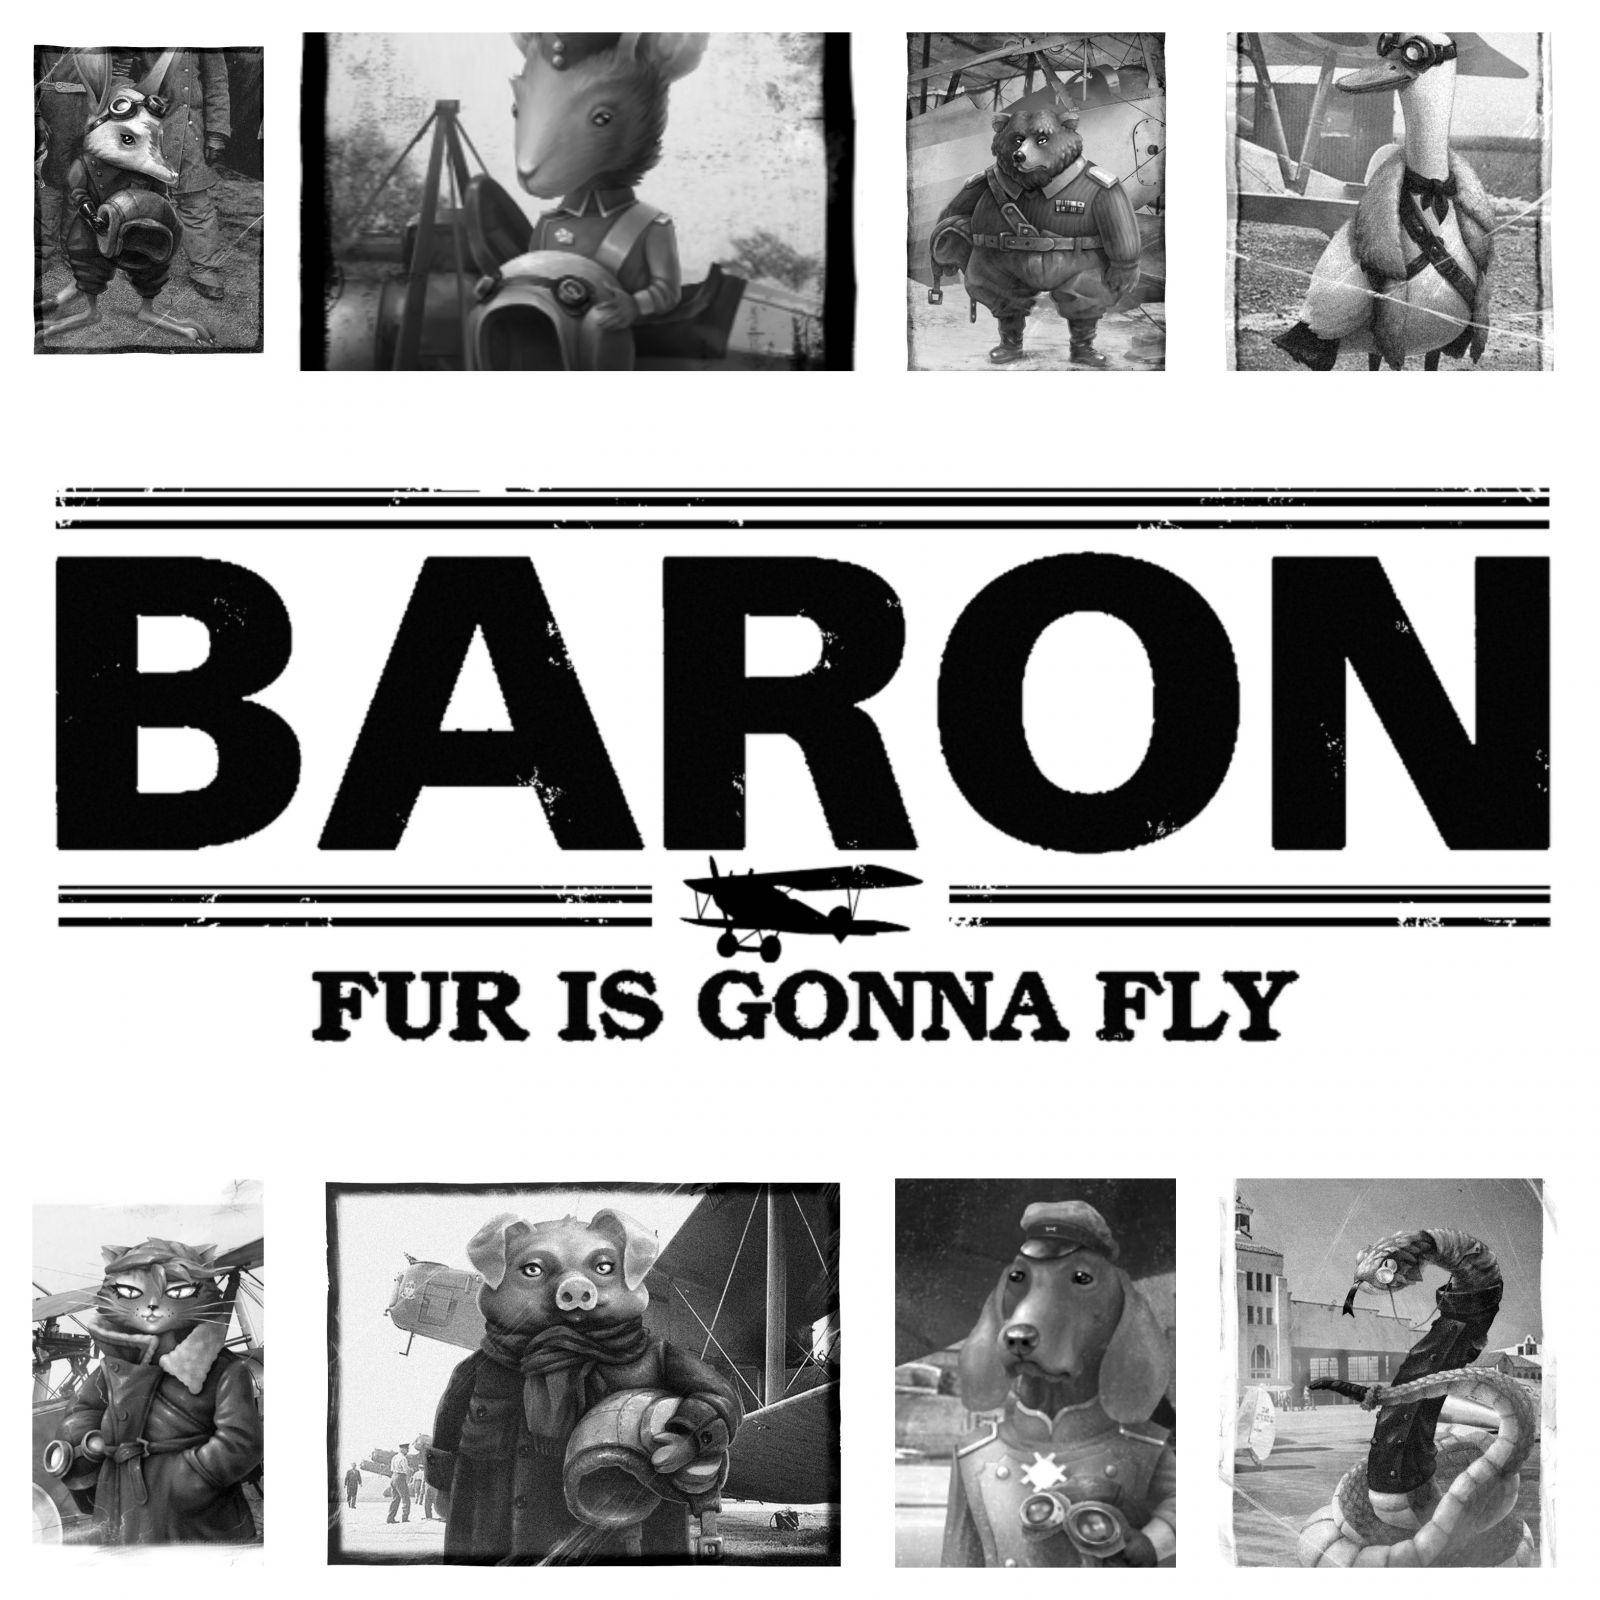 Baron: Fur Is Gonna Fly (Personajes)